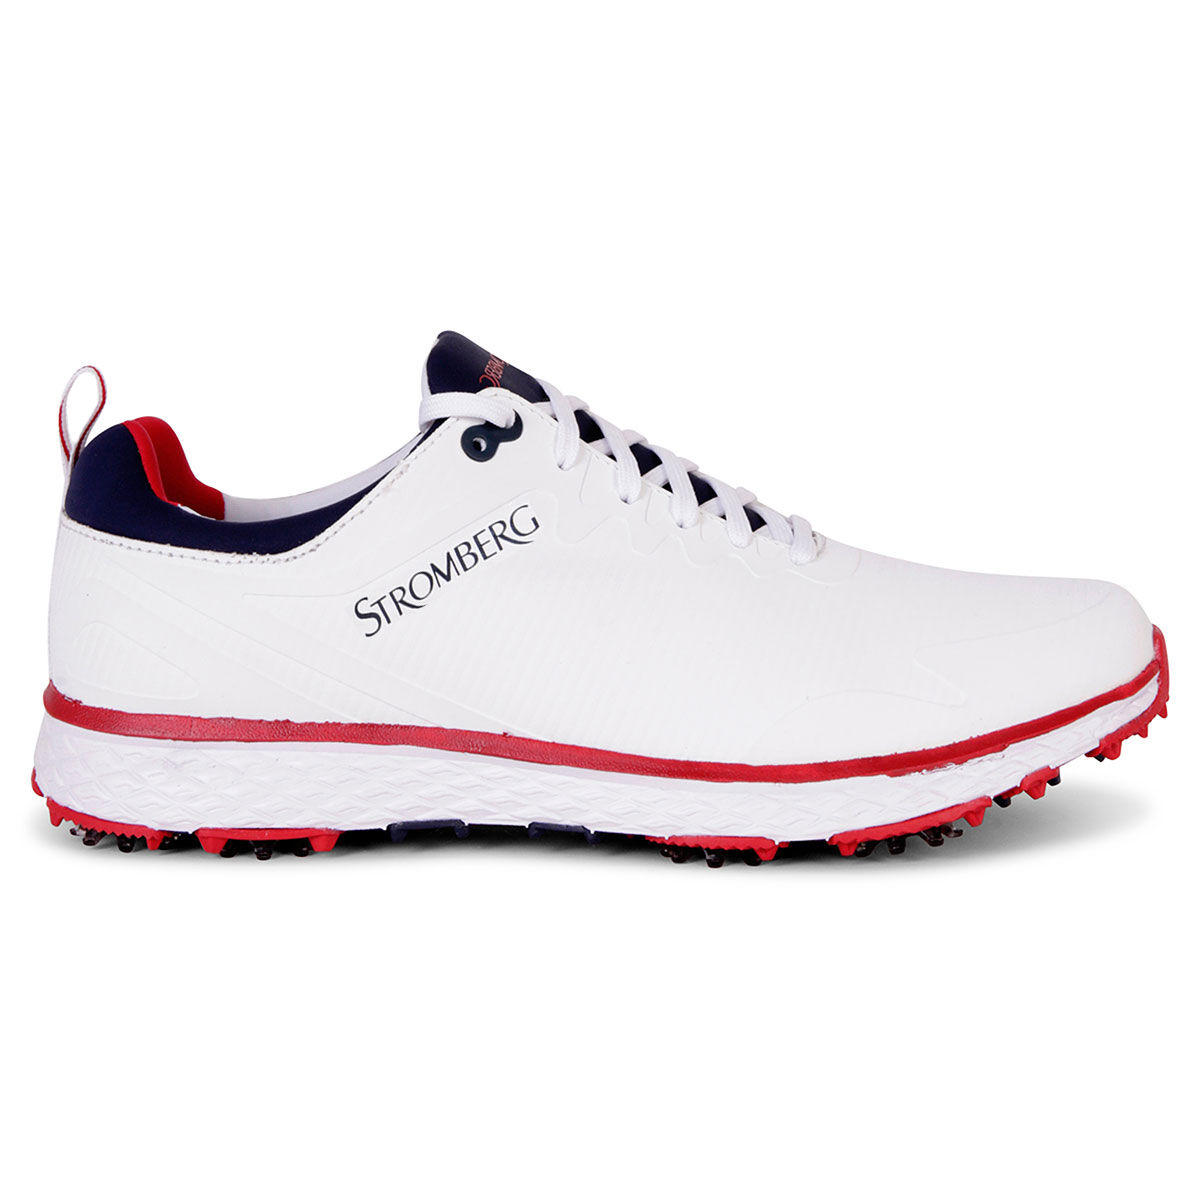 Stromberg Men's Tempo Waterproof Spiked Golf Shoes, Mens, White/navy/red, 7 | American Golf von Stromberg